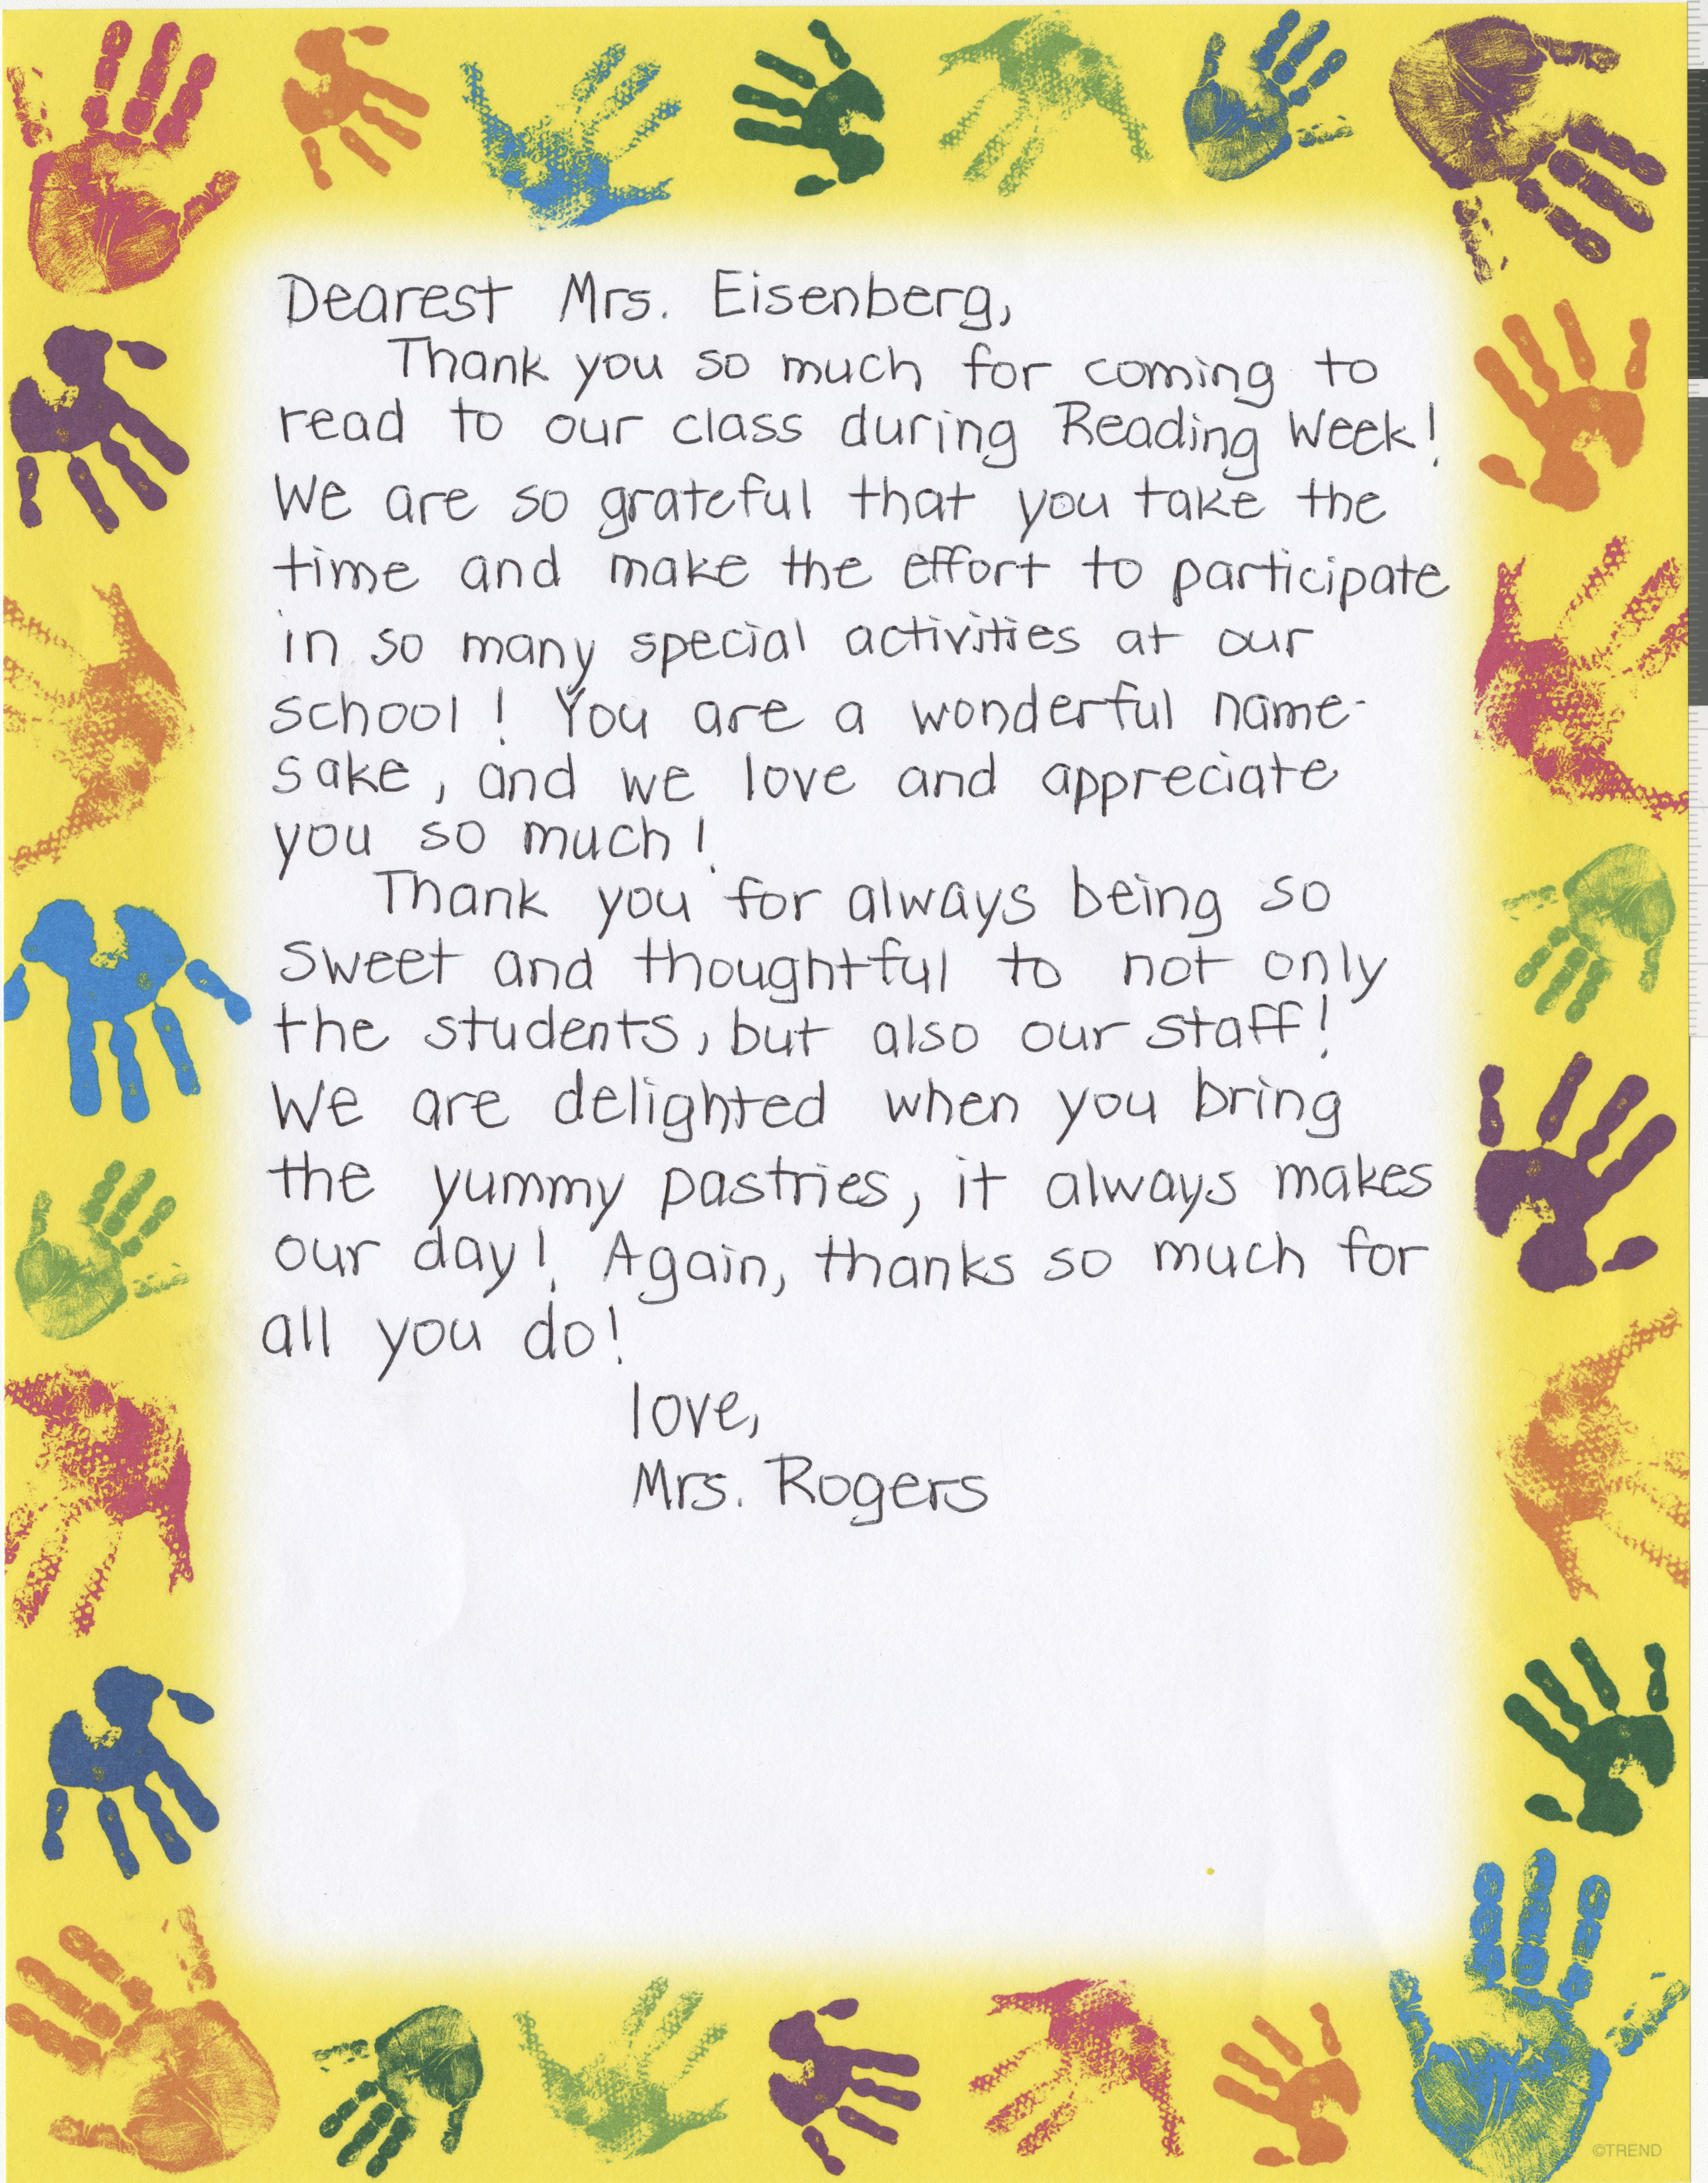 Letter from Mrs. Rogers to Dorothy Eisenberg about Pajama Day